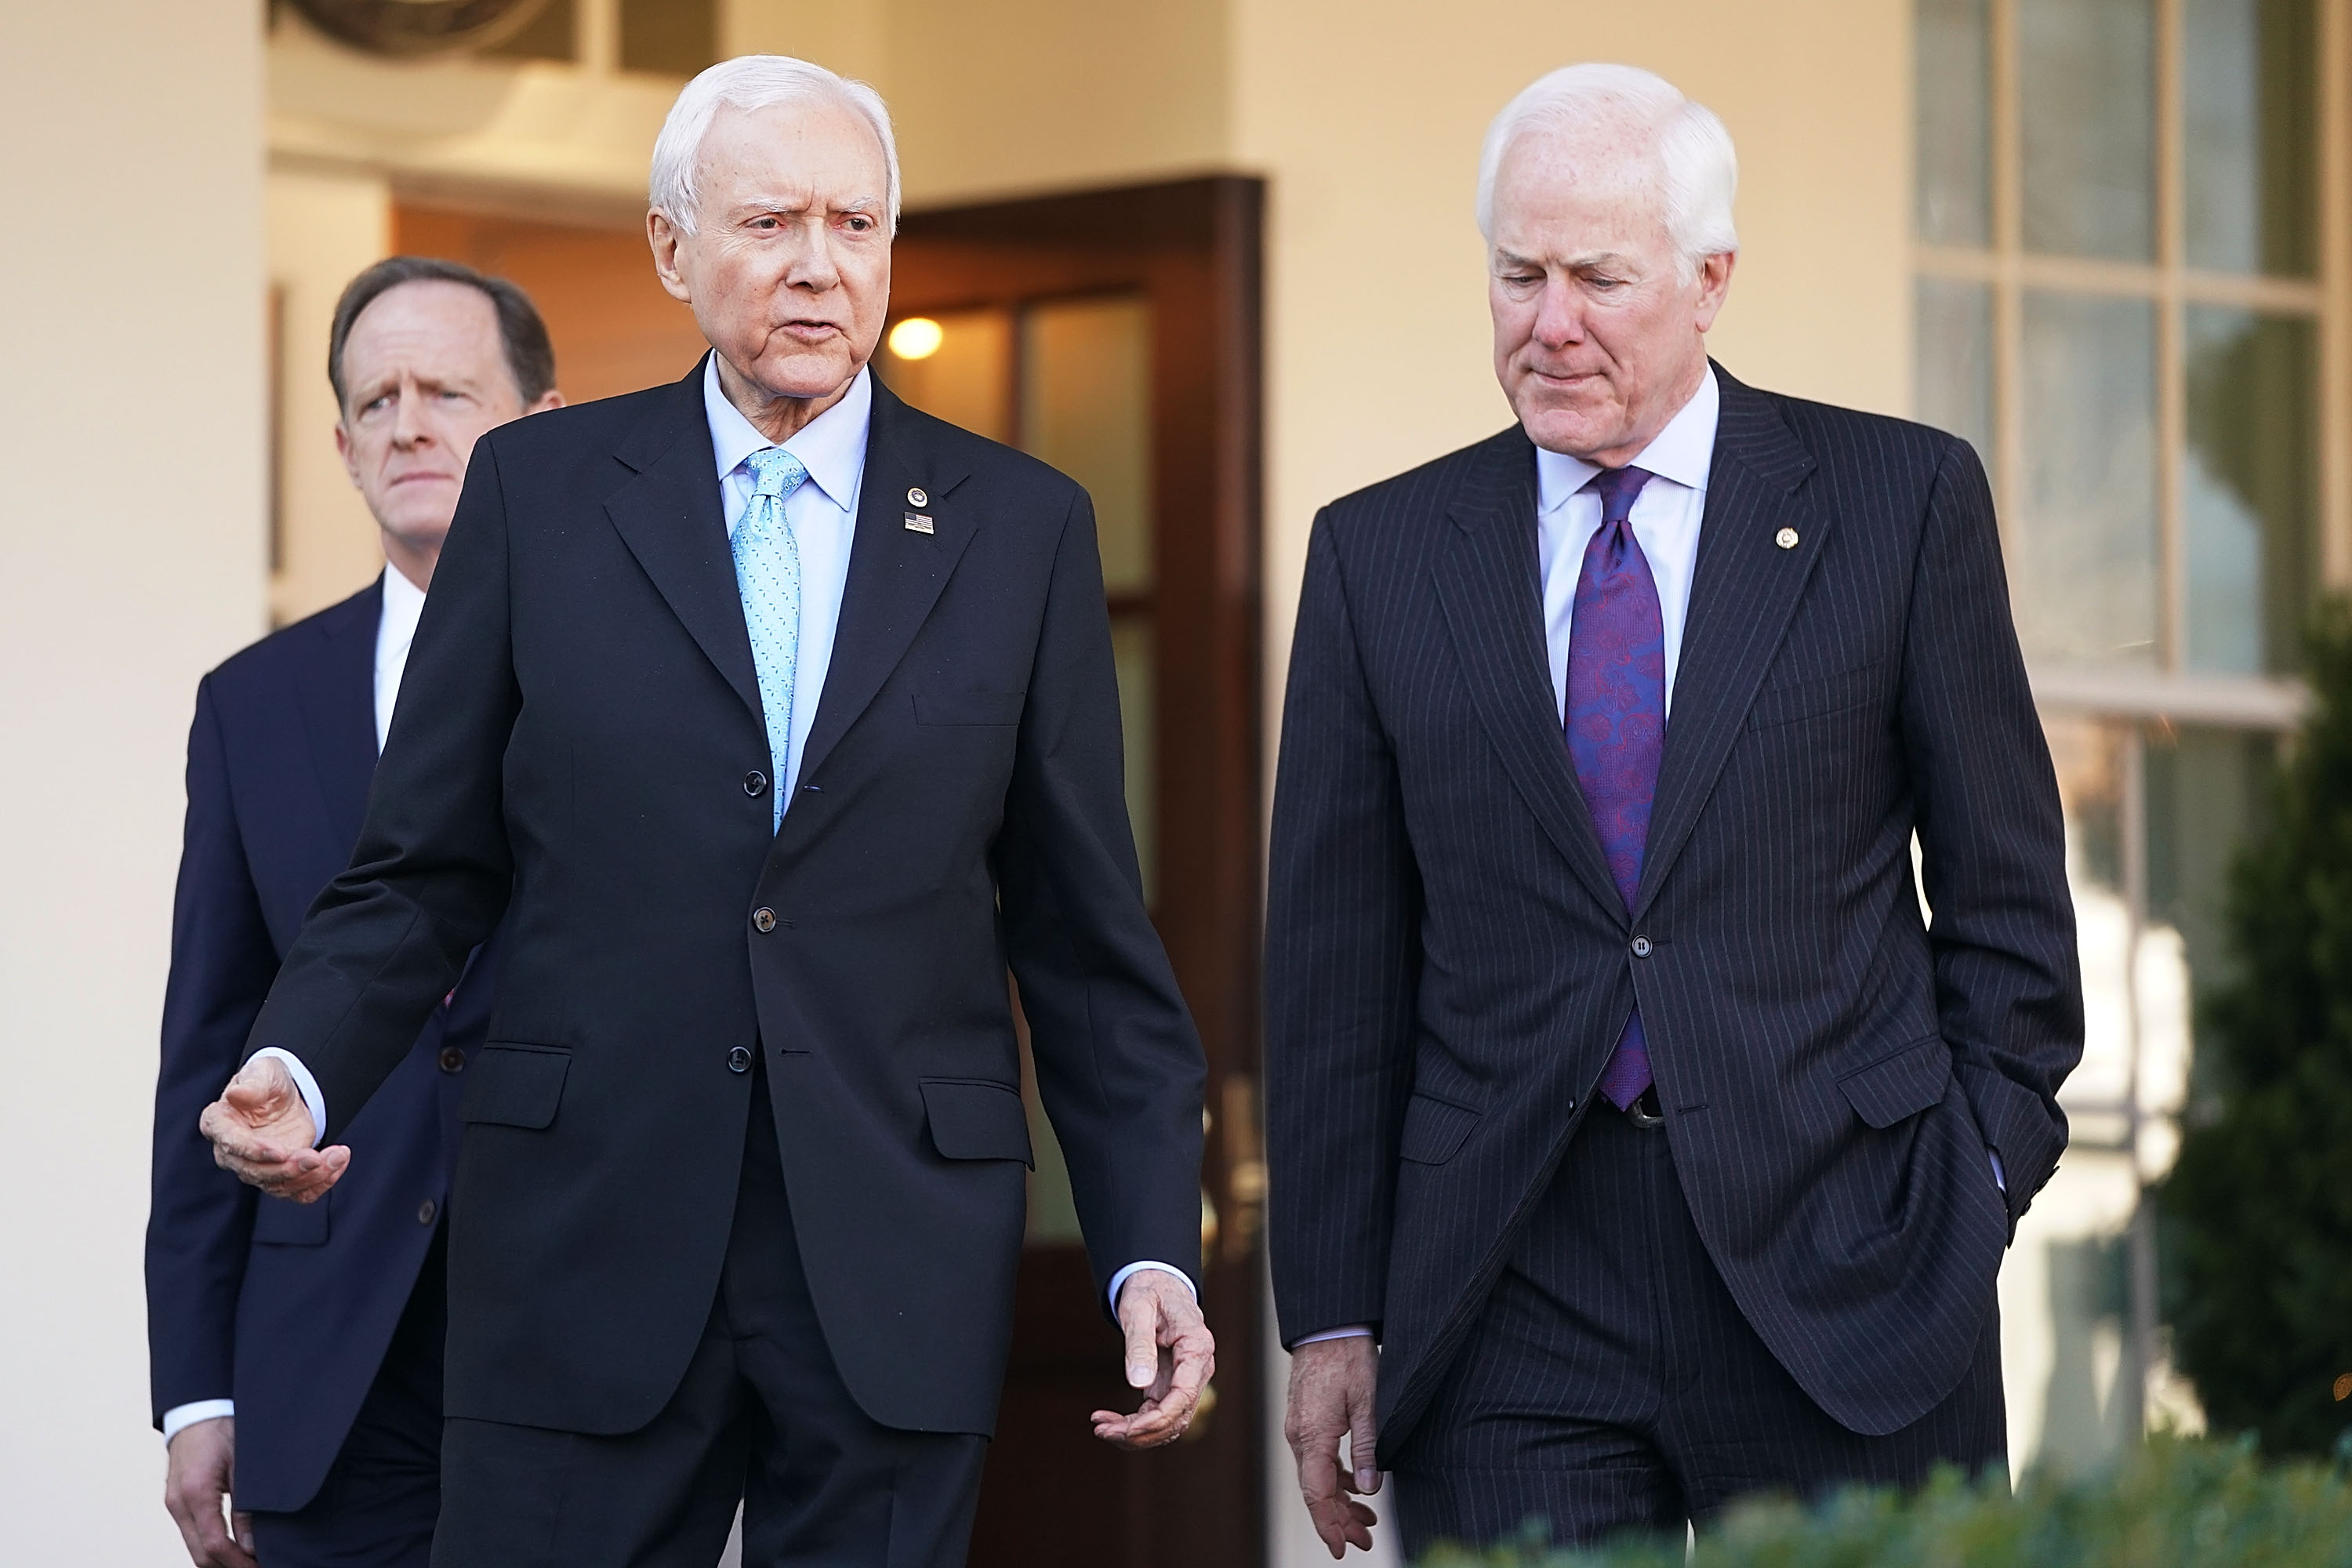 Senate Finance Committee members Sen. Pat Toomey (R-PA) (L) and Sen. John Cornyn (R-TX) (R) walk out of the West Wing with Chairman Orrin Hatch (R-UT) following a lunch meeting with U.S. President Donald Trump at the White House November 27, 2017 in Washington, DC. (Chip Somodevilla—Getty Images)